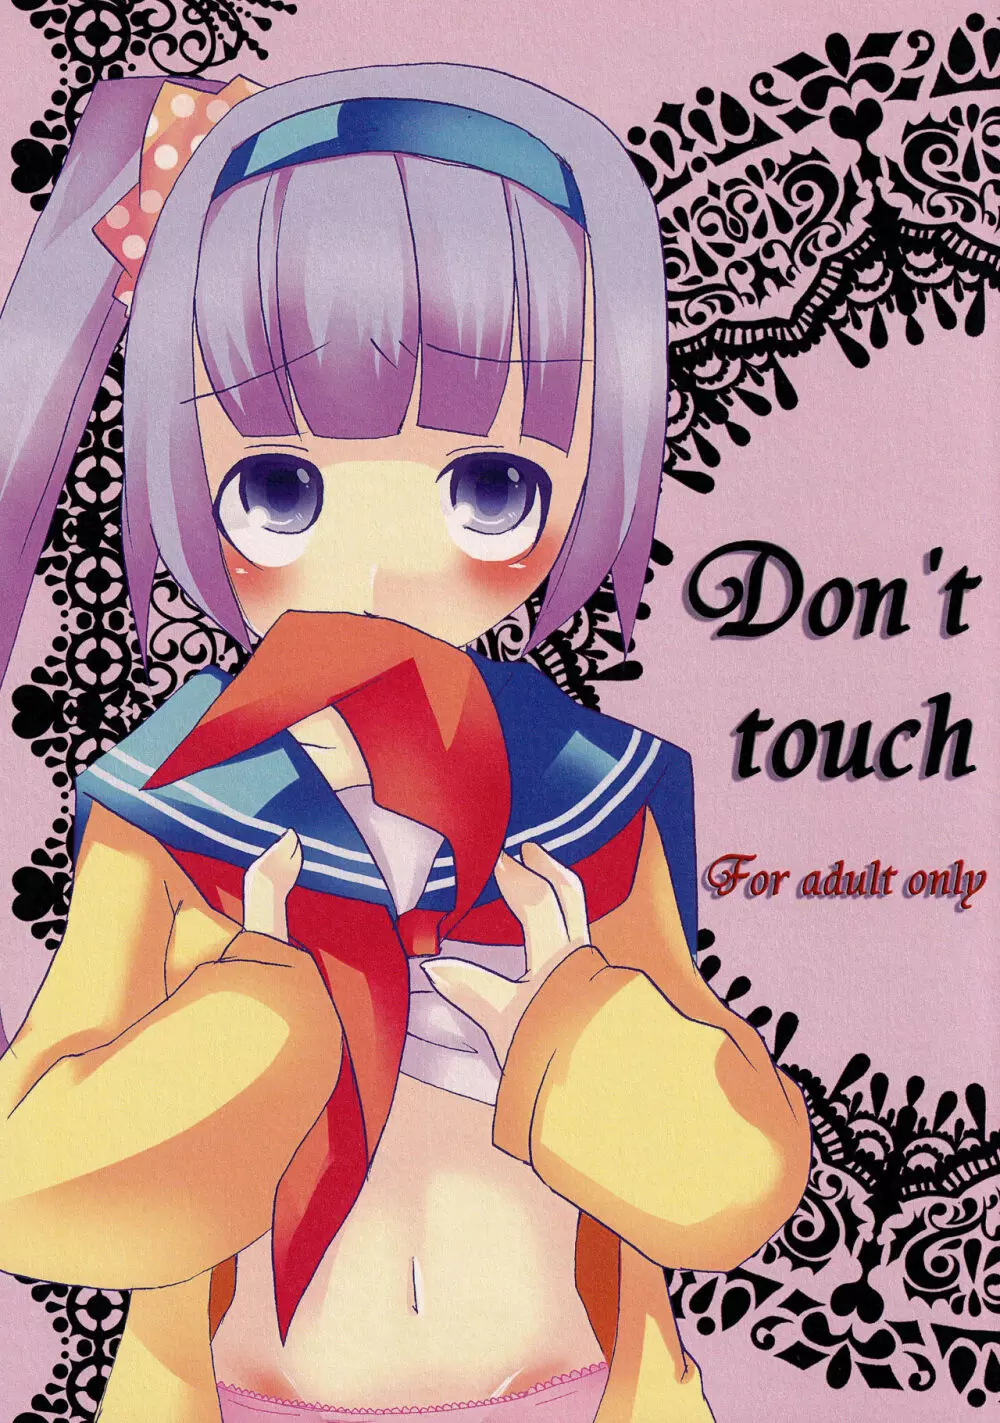 Don’t touch